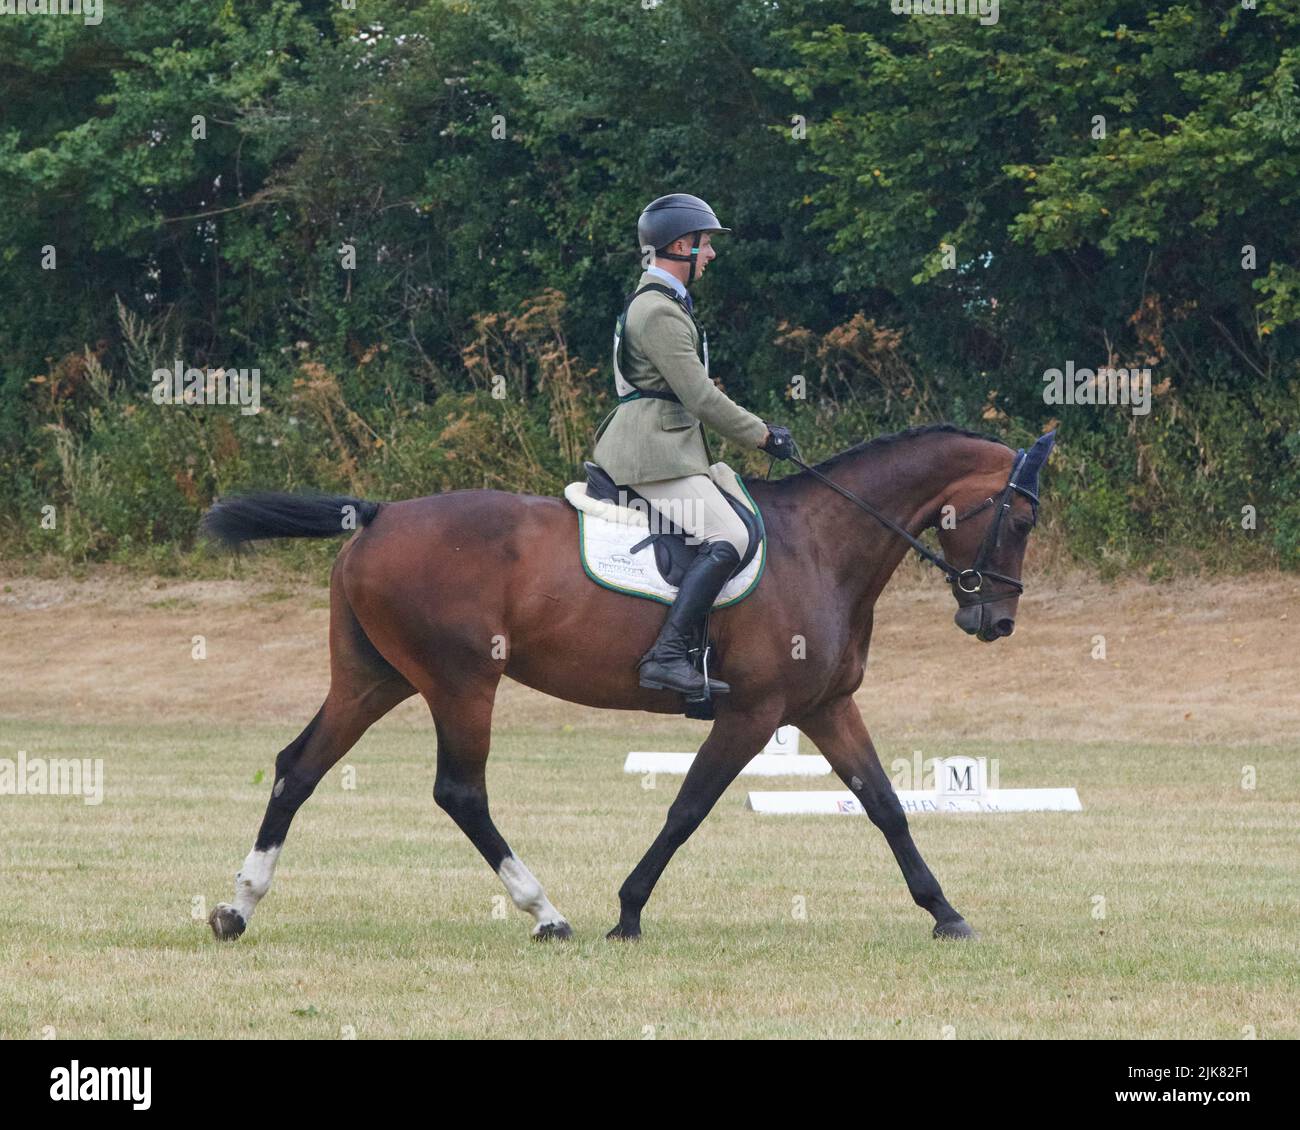 East Budleigh Salterton, United Kingdom, 31 Jul, 2022, Harry Dzenis rides Forge Ahead in the Dressage section of Bicton Horse Trials at Bicton Horse Trials. Credit: Will Tudor/Alamy Live News Stock Photo